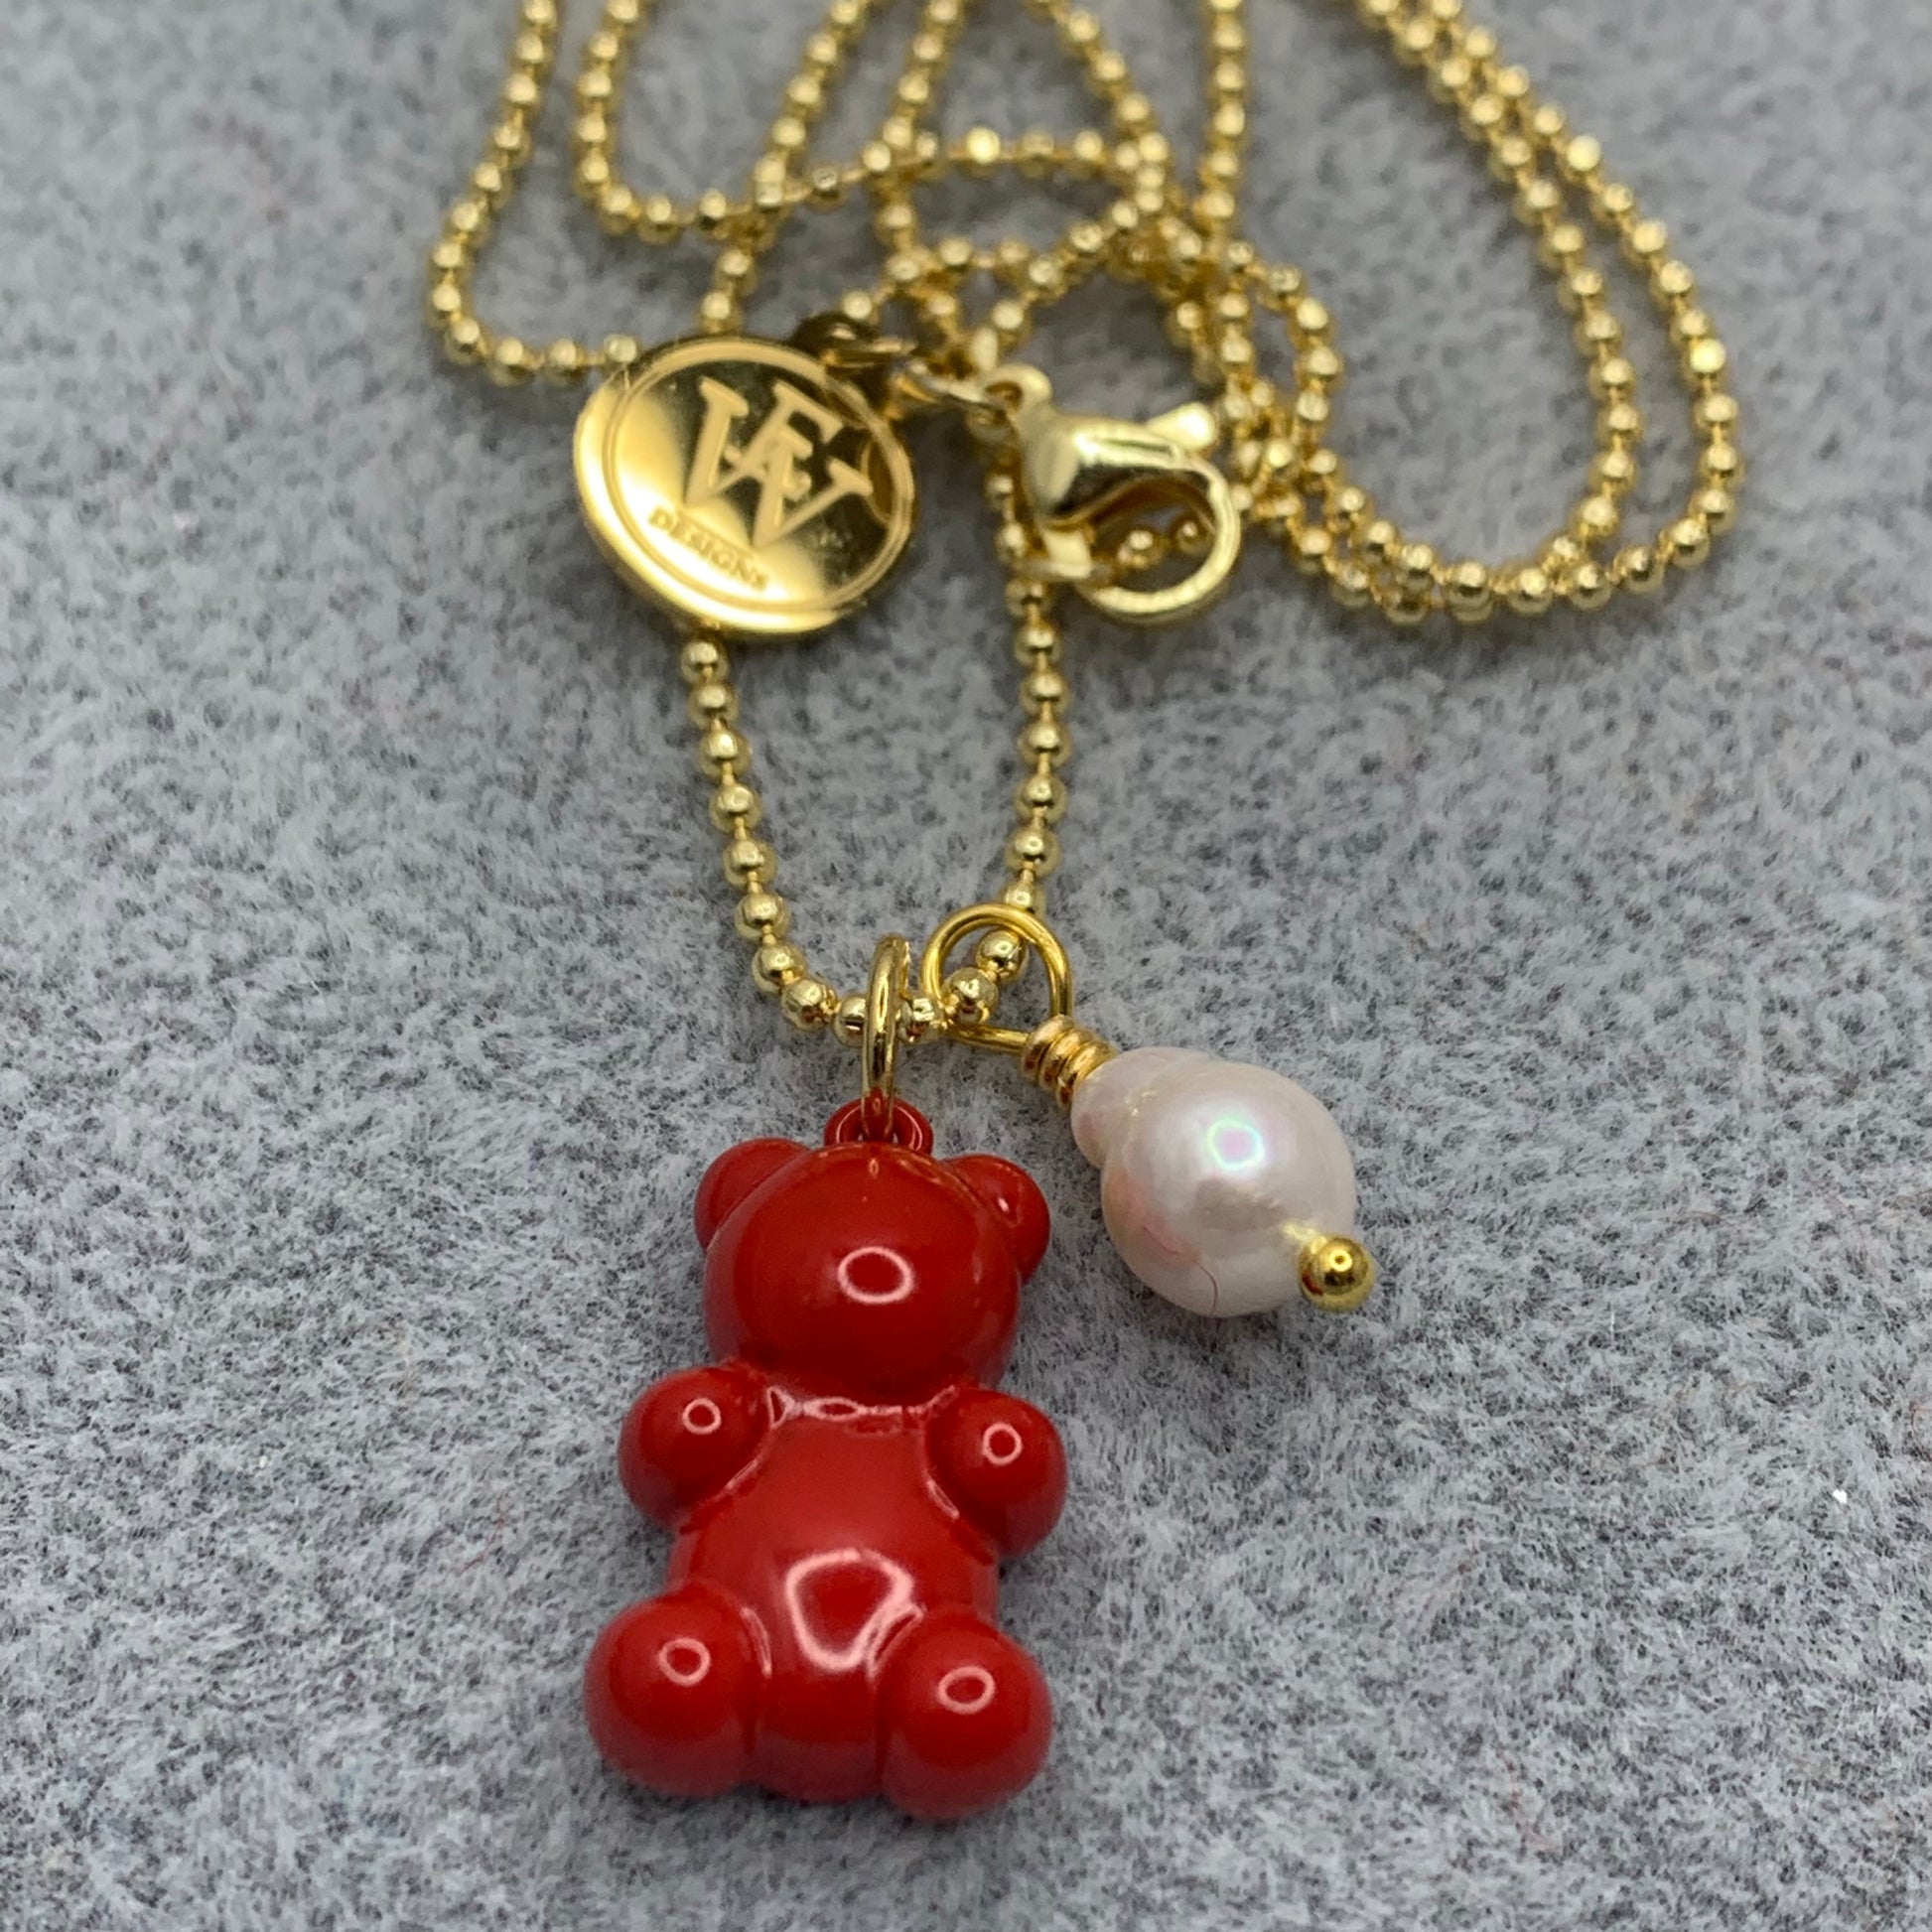 Mini ball and chain necklace with red enameled gummy bear pendant